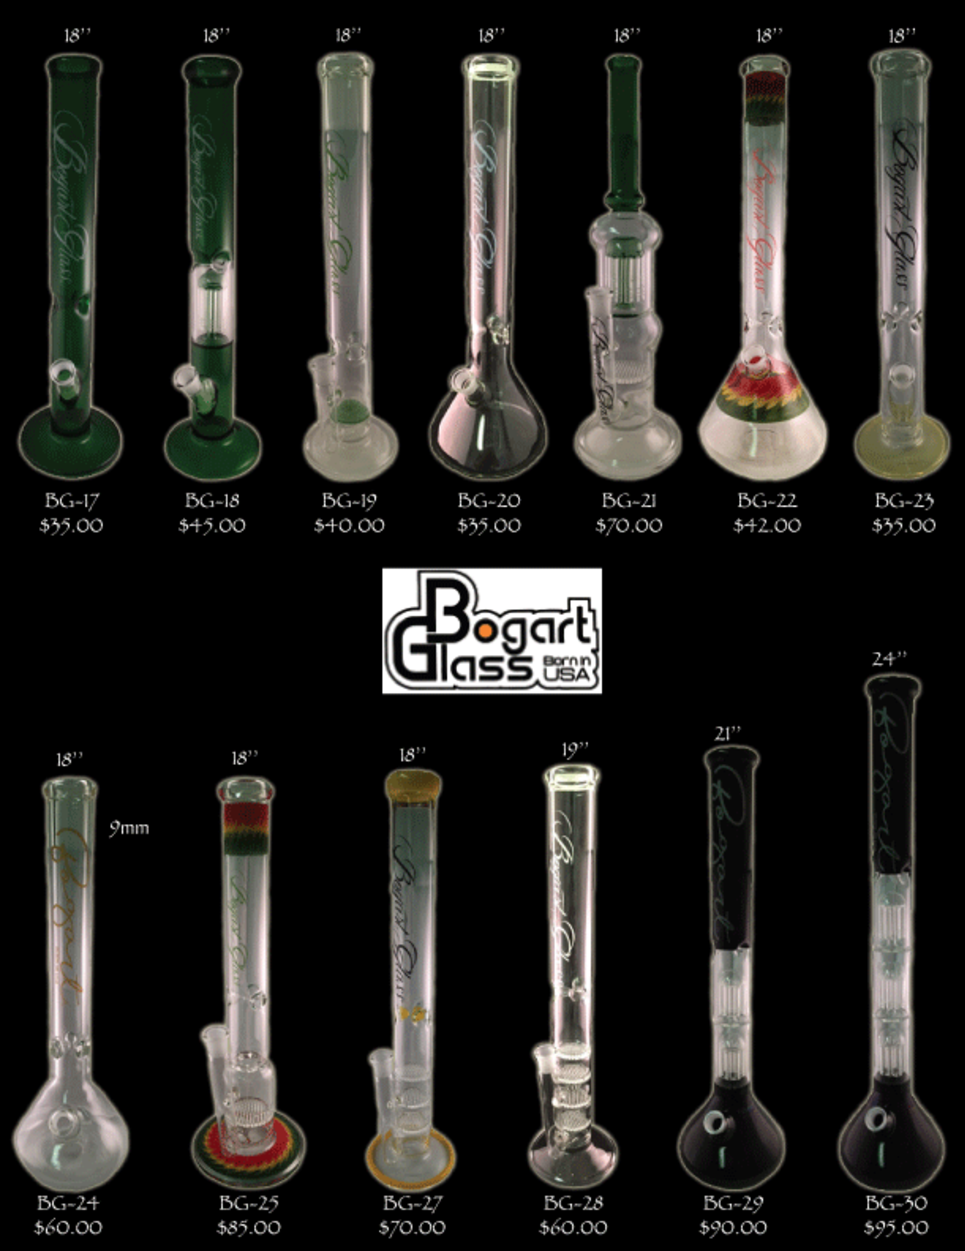 Bogart Made in the USA Water Pipes